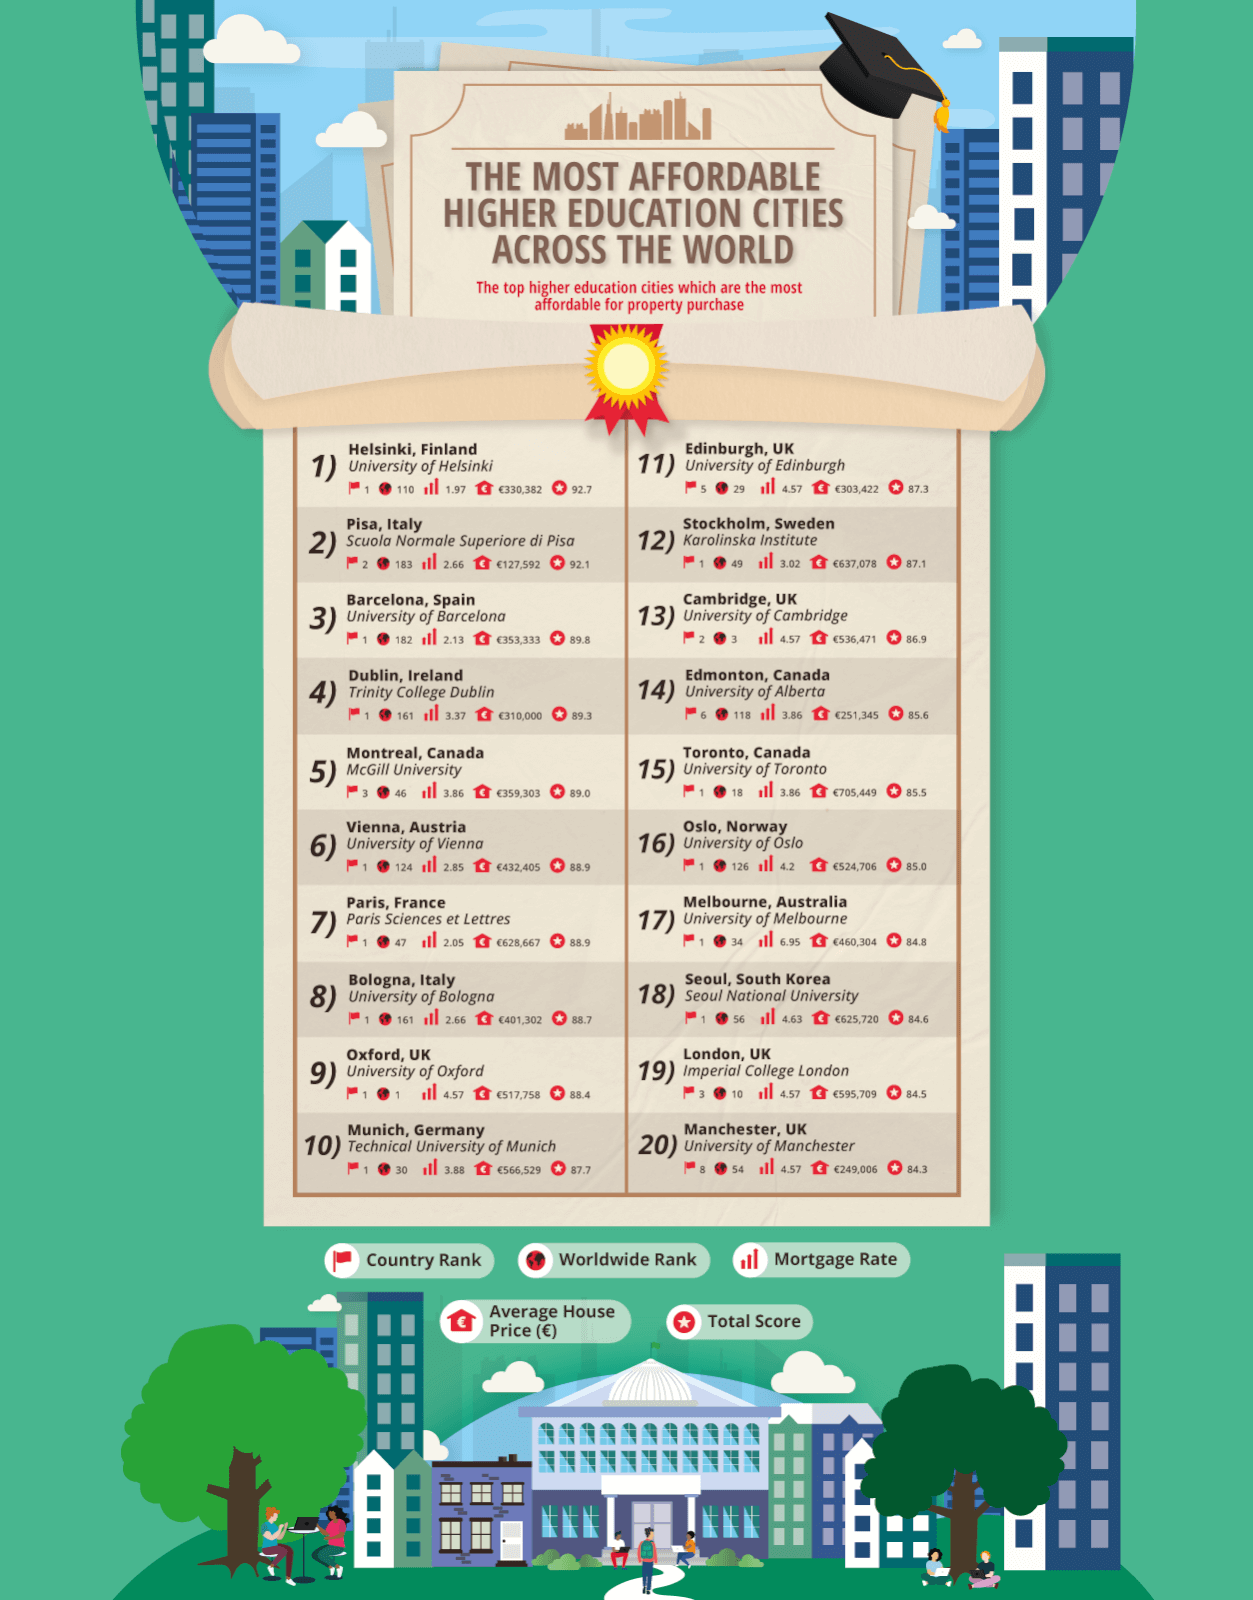 Image showing the top 20 most affordable higher education cities across the world.